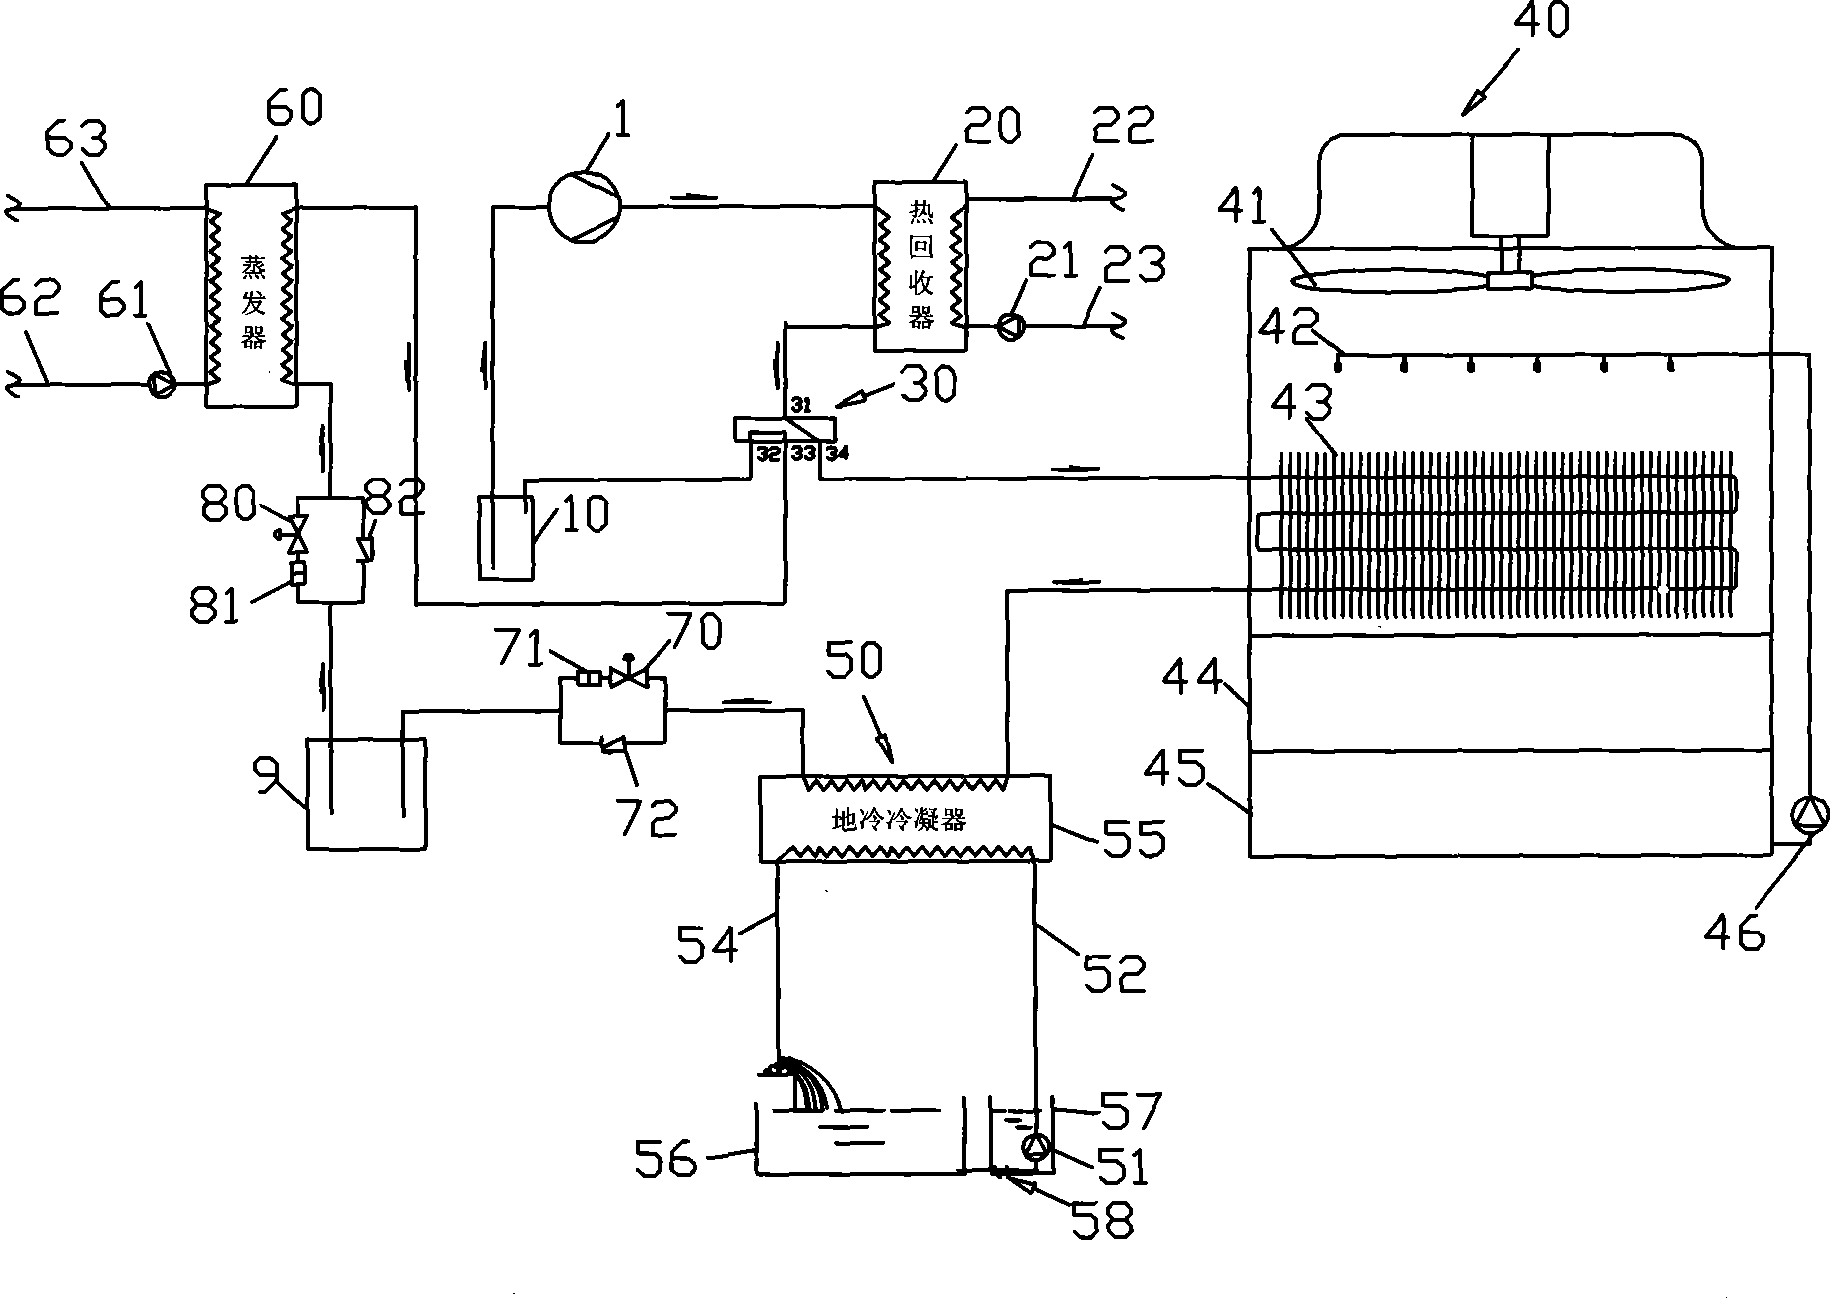 Composite multi-source central air-conditioning machine set using geothermal energy